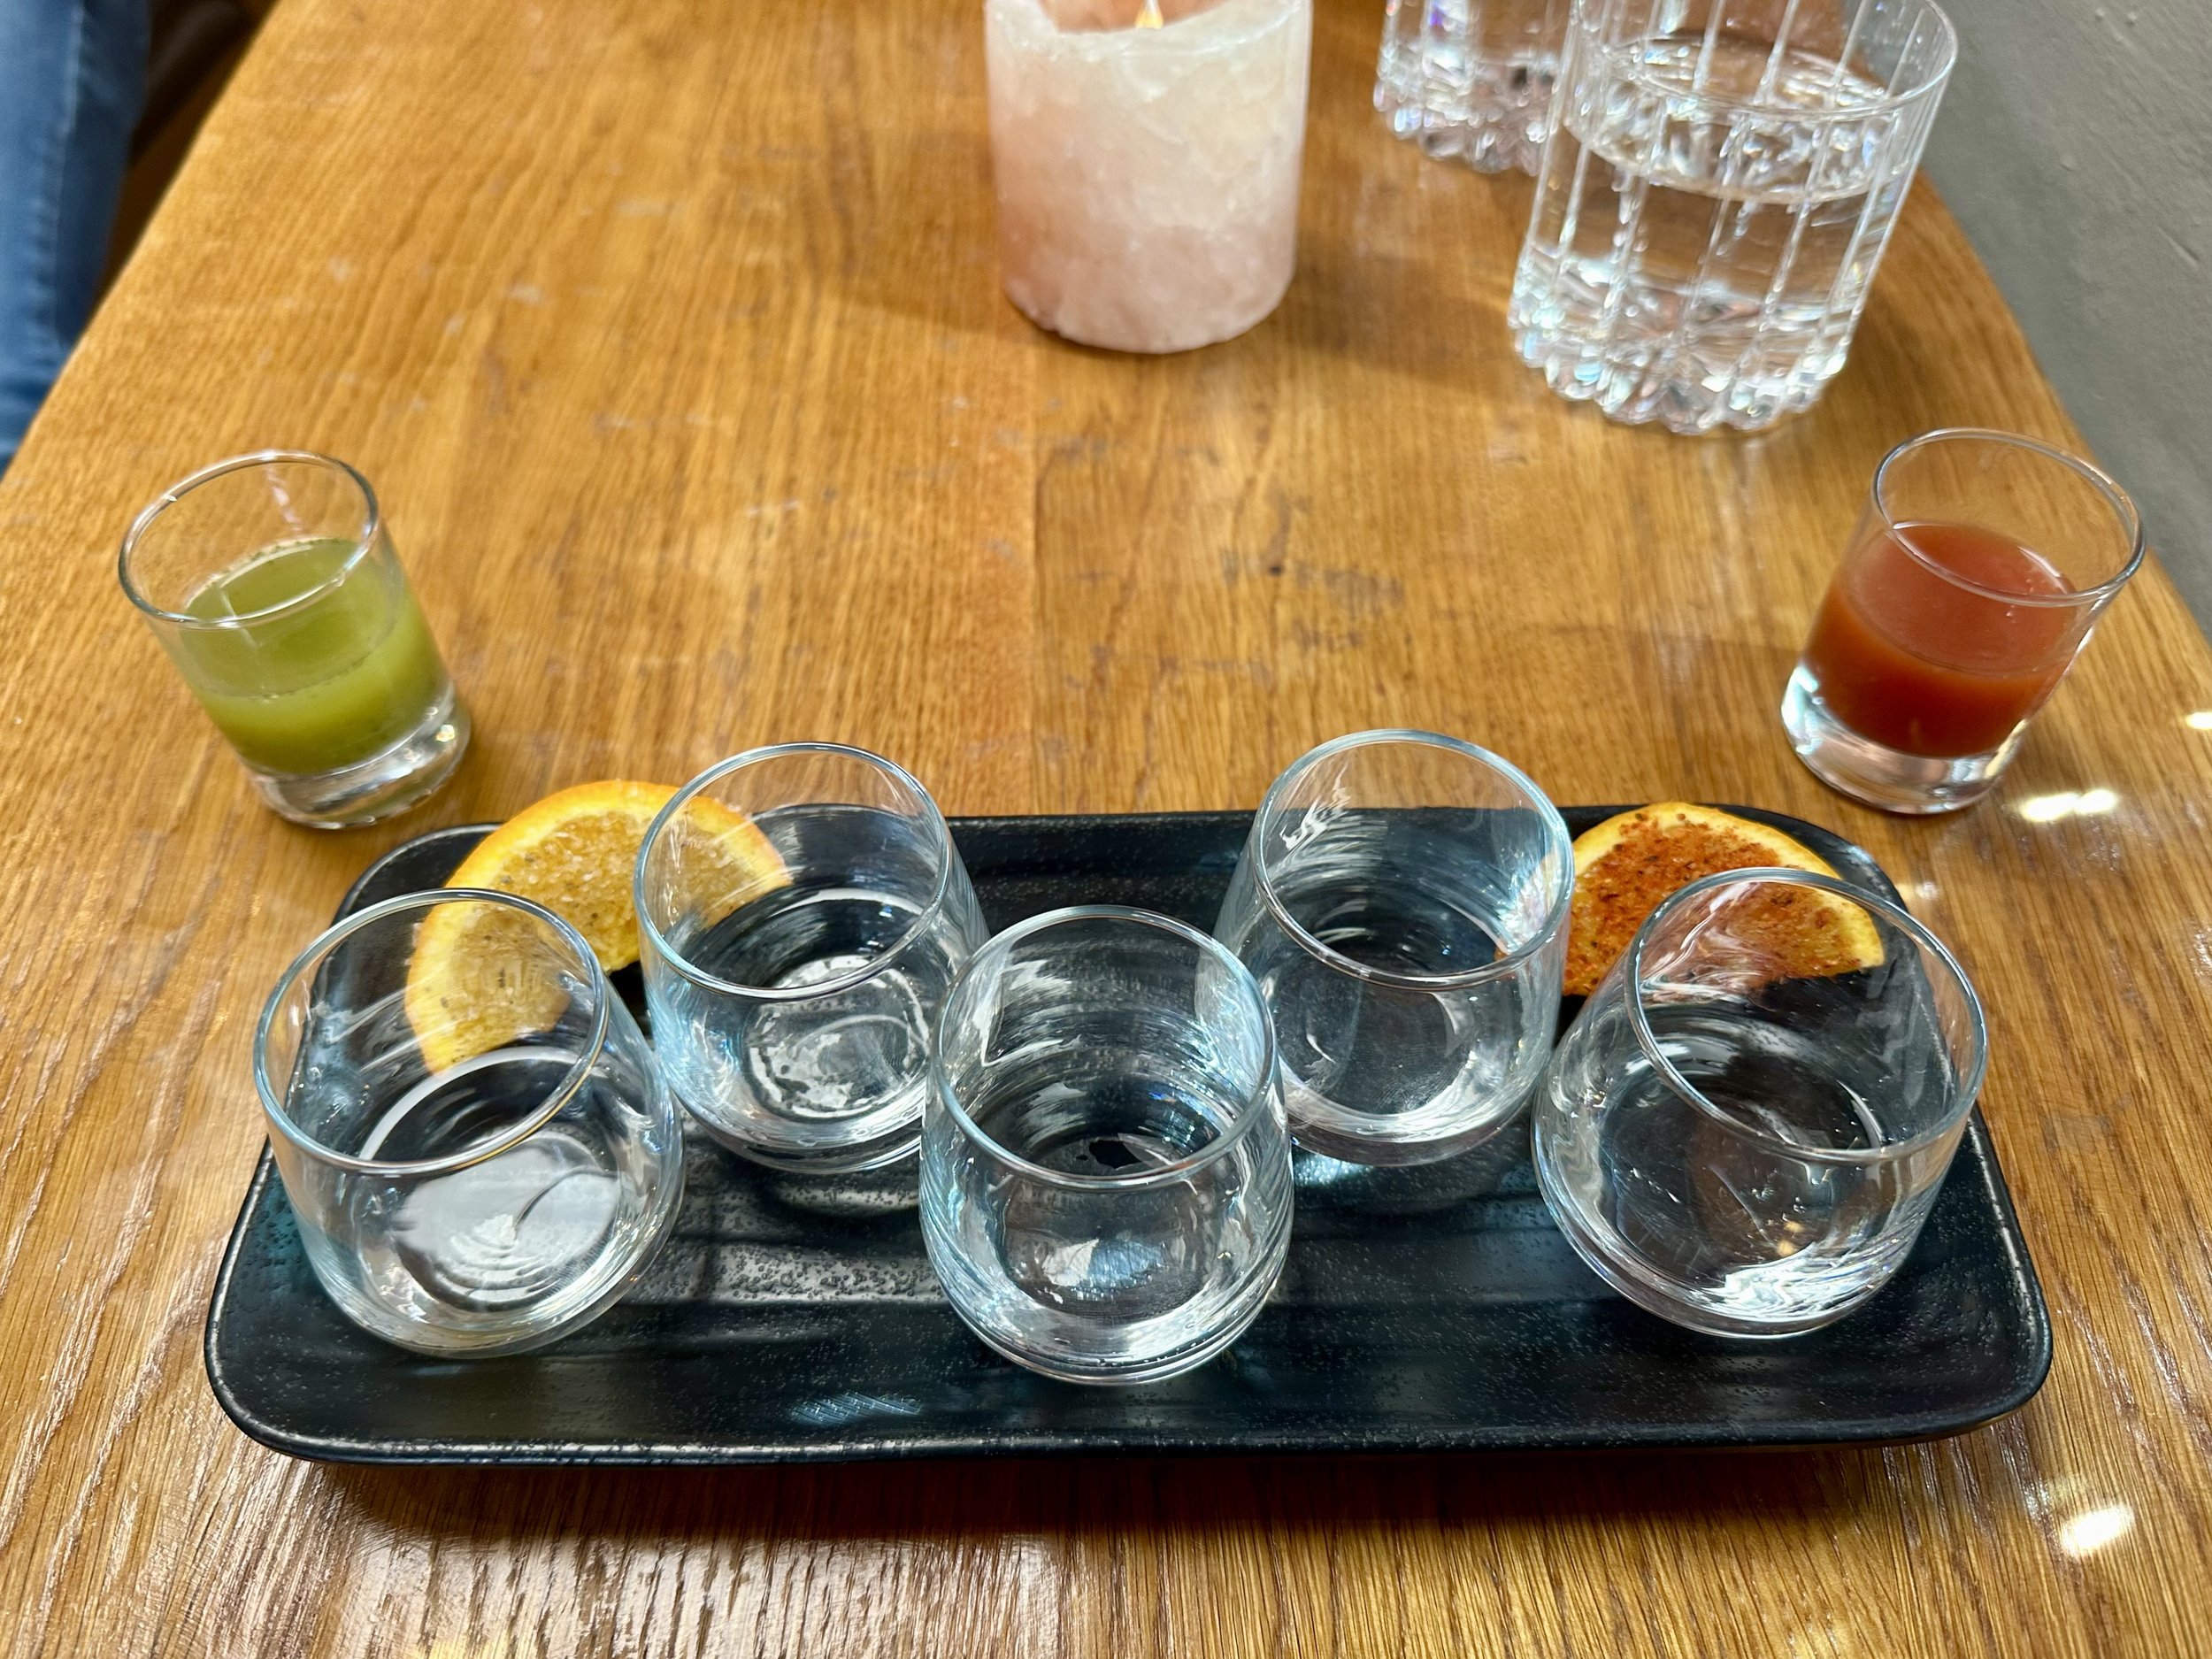 Five different agave spirits, plus fresh citrus slices and house-made sangrita